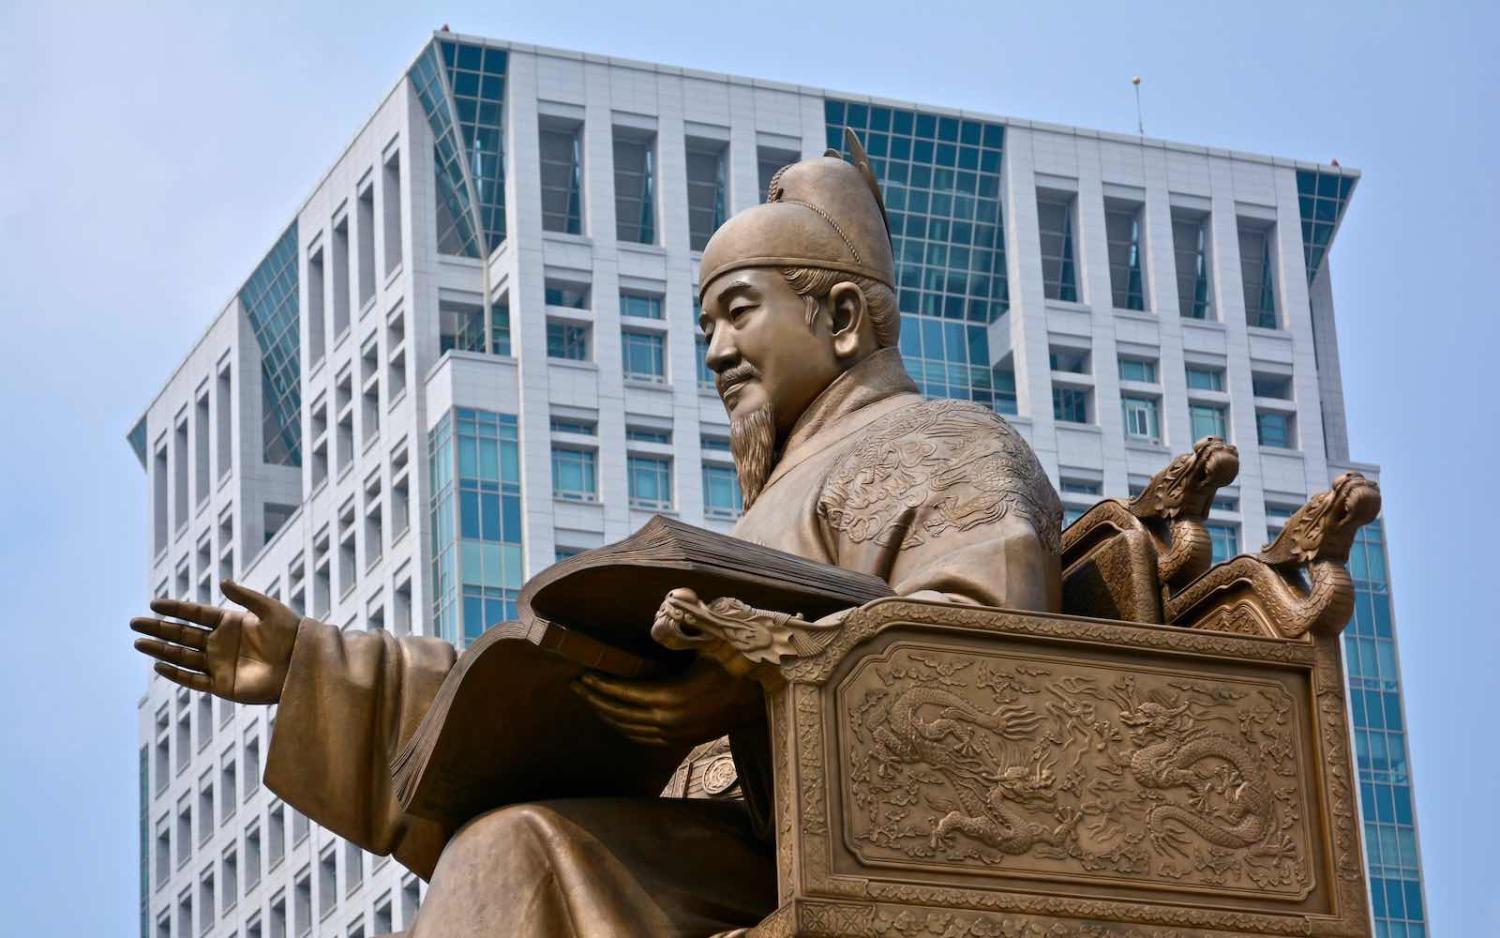 Statue of King Sejong in front of the Republic of Korea’s Ministry of Foreign Affairs, Seoul (Getty Images)